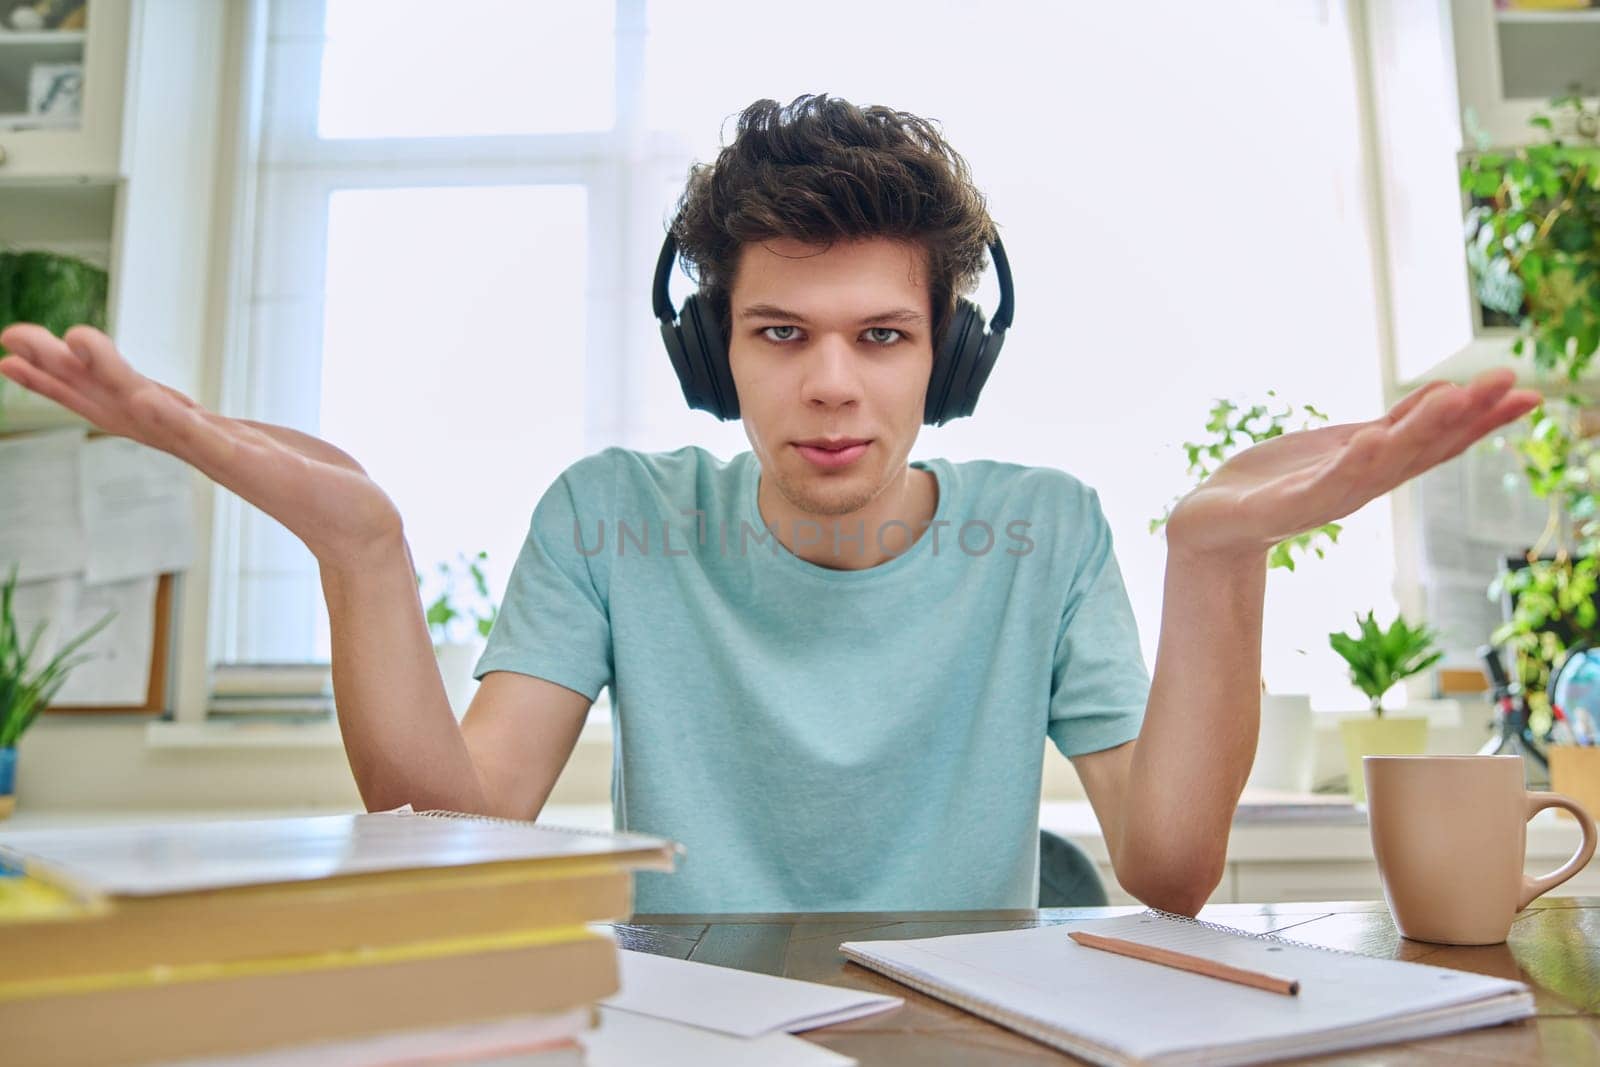 Webcam view of college student guy wearing headphones, talking looking at camera, sitting at desk in home. Young male studying online, video chat call conference, e-learning technology education